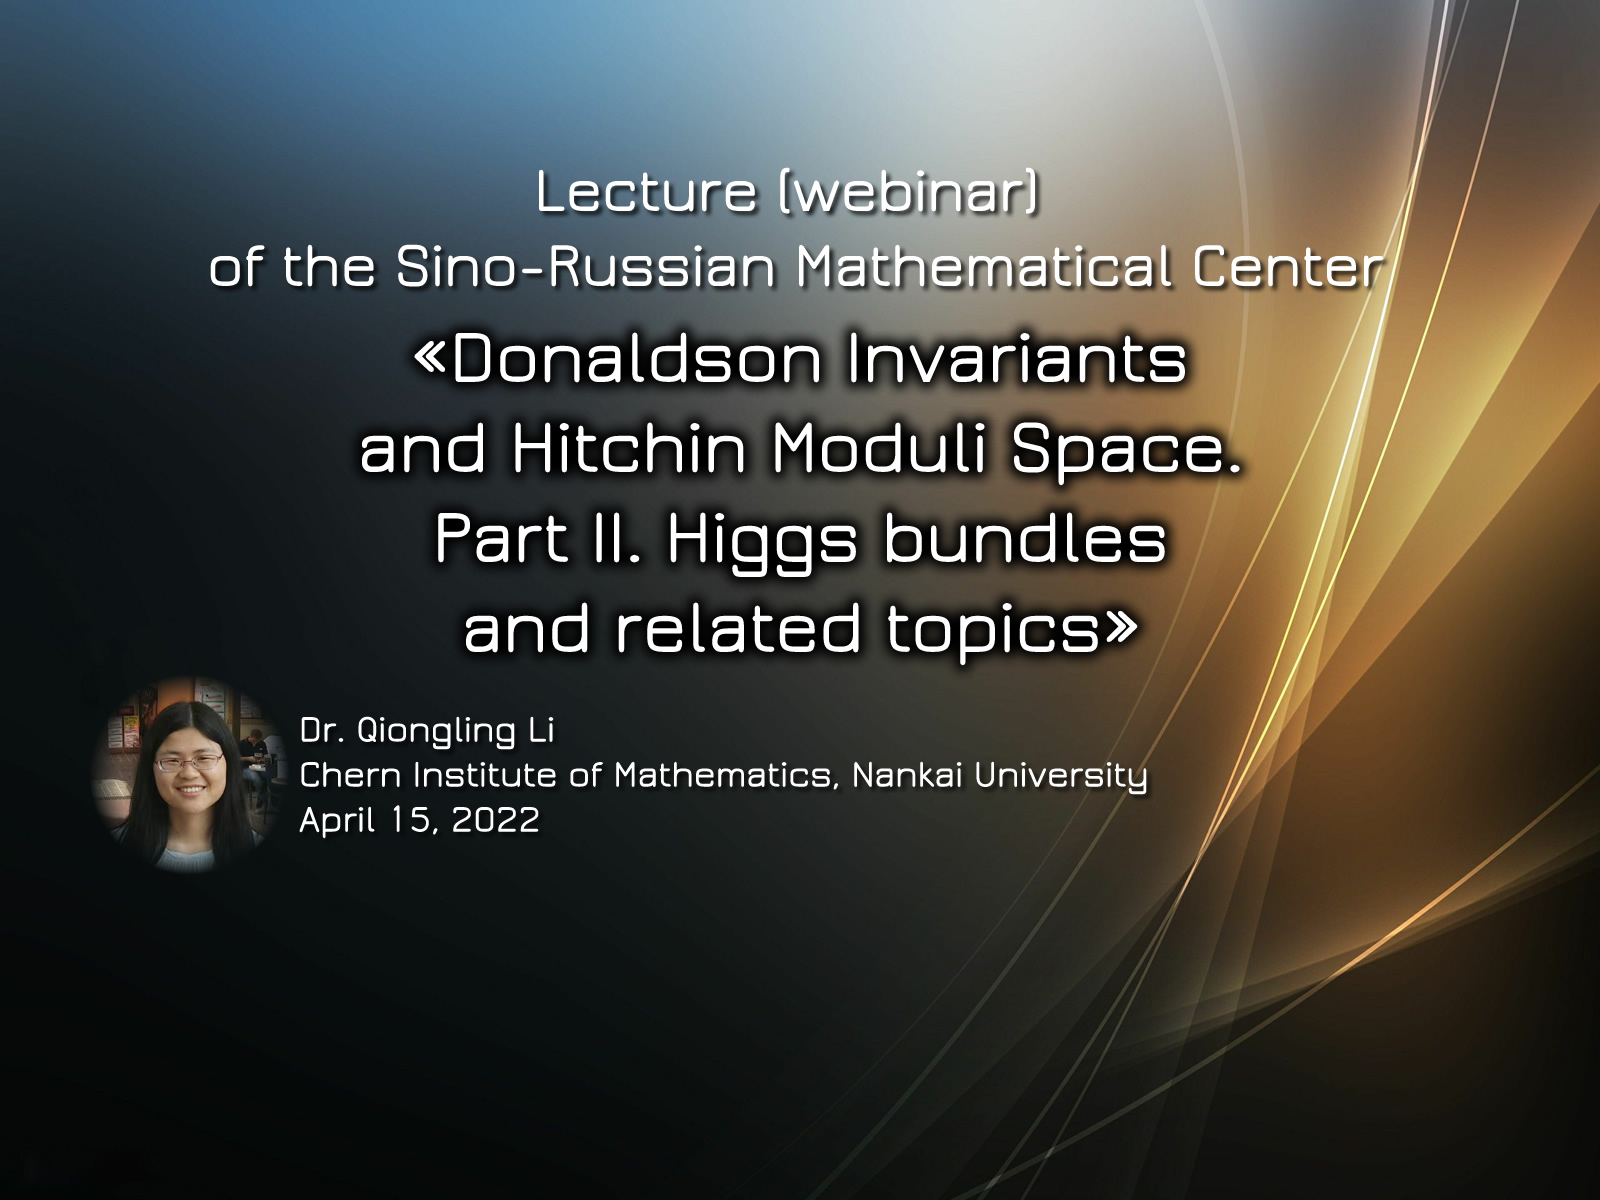 «Higgs bundles and related topics» 15.04.2022